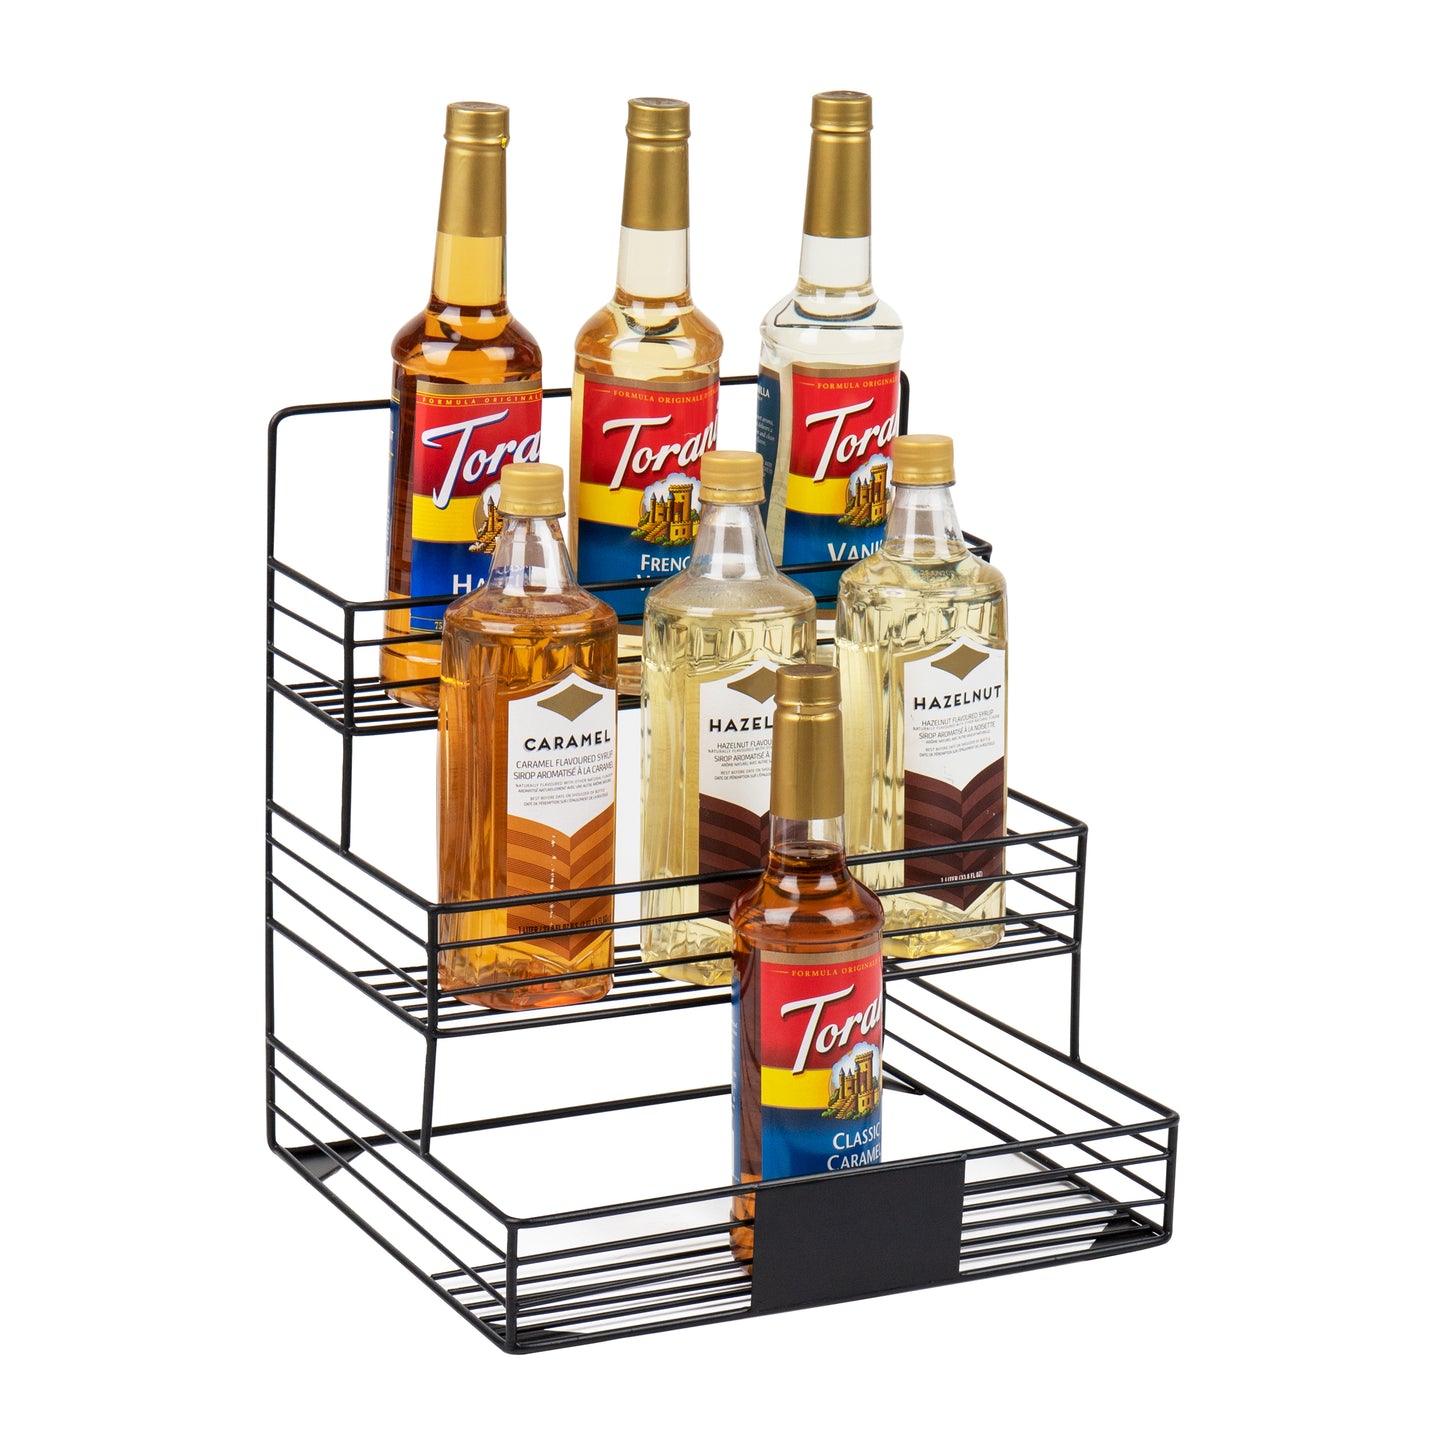 Mind Reader Alloy Collection, Tiered Bottle Stand, Countertop Organizer, Metal, Black